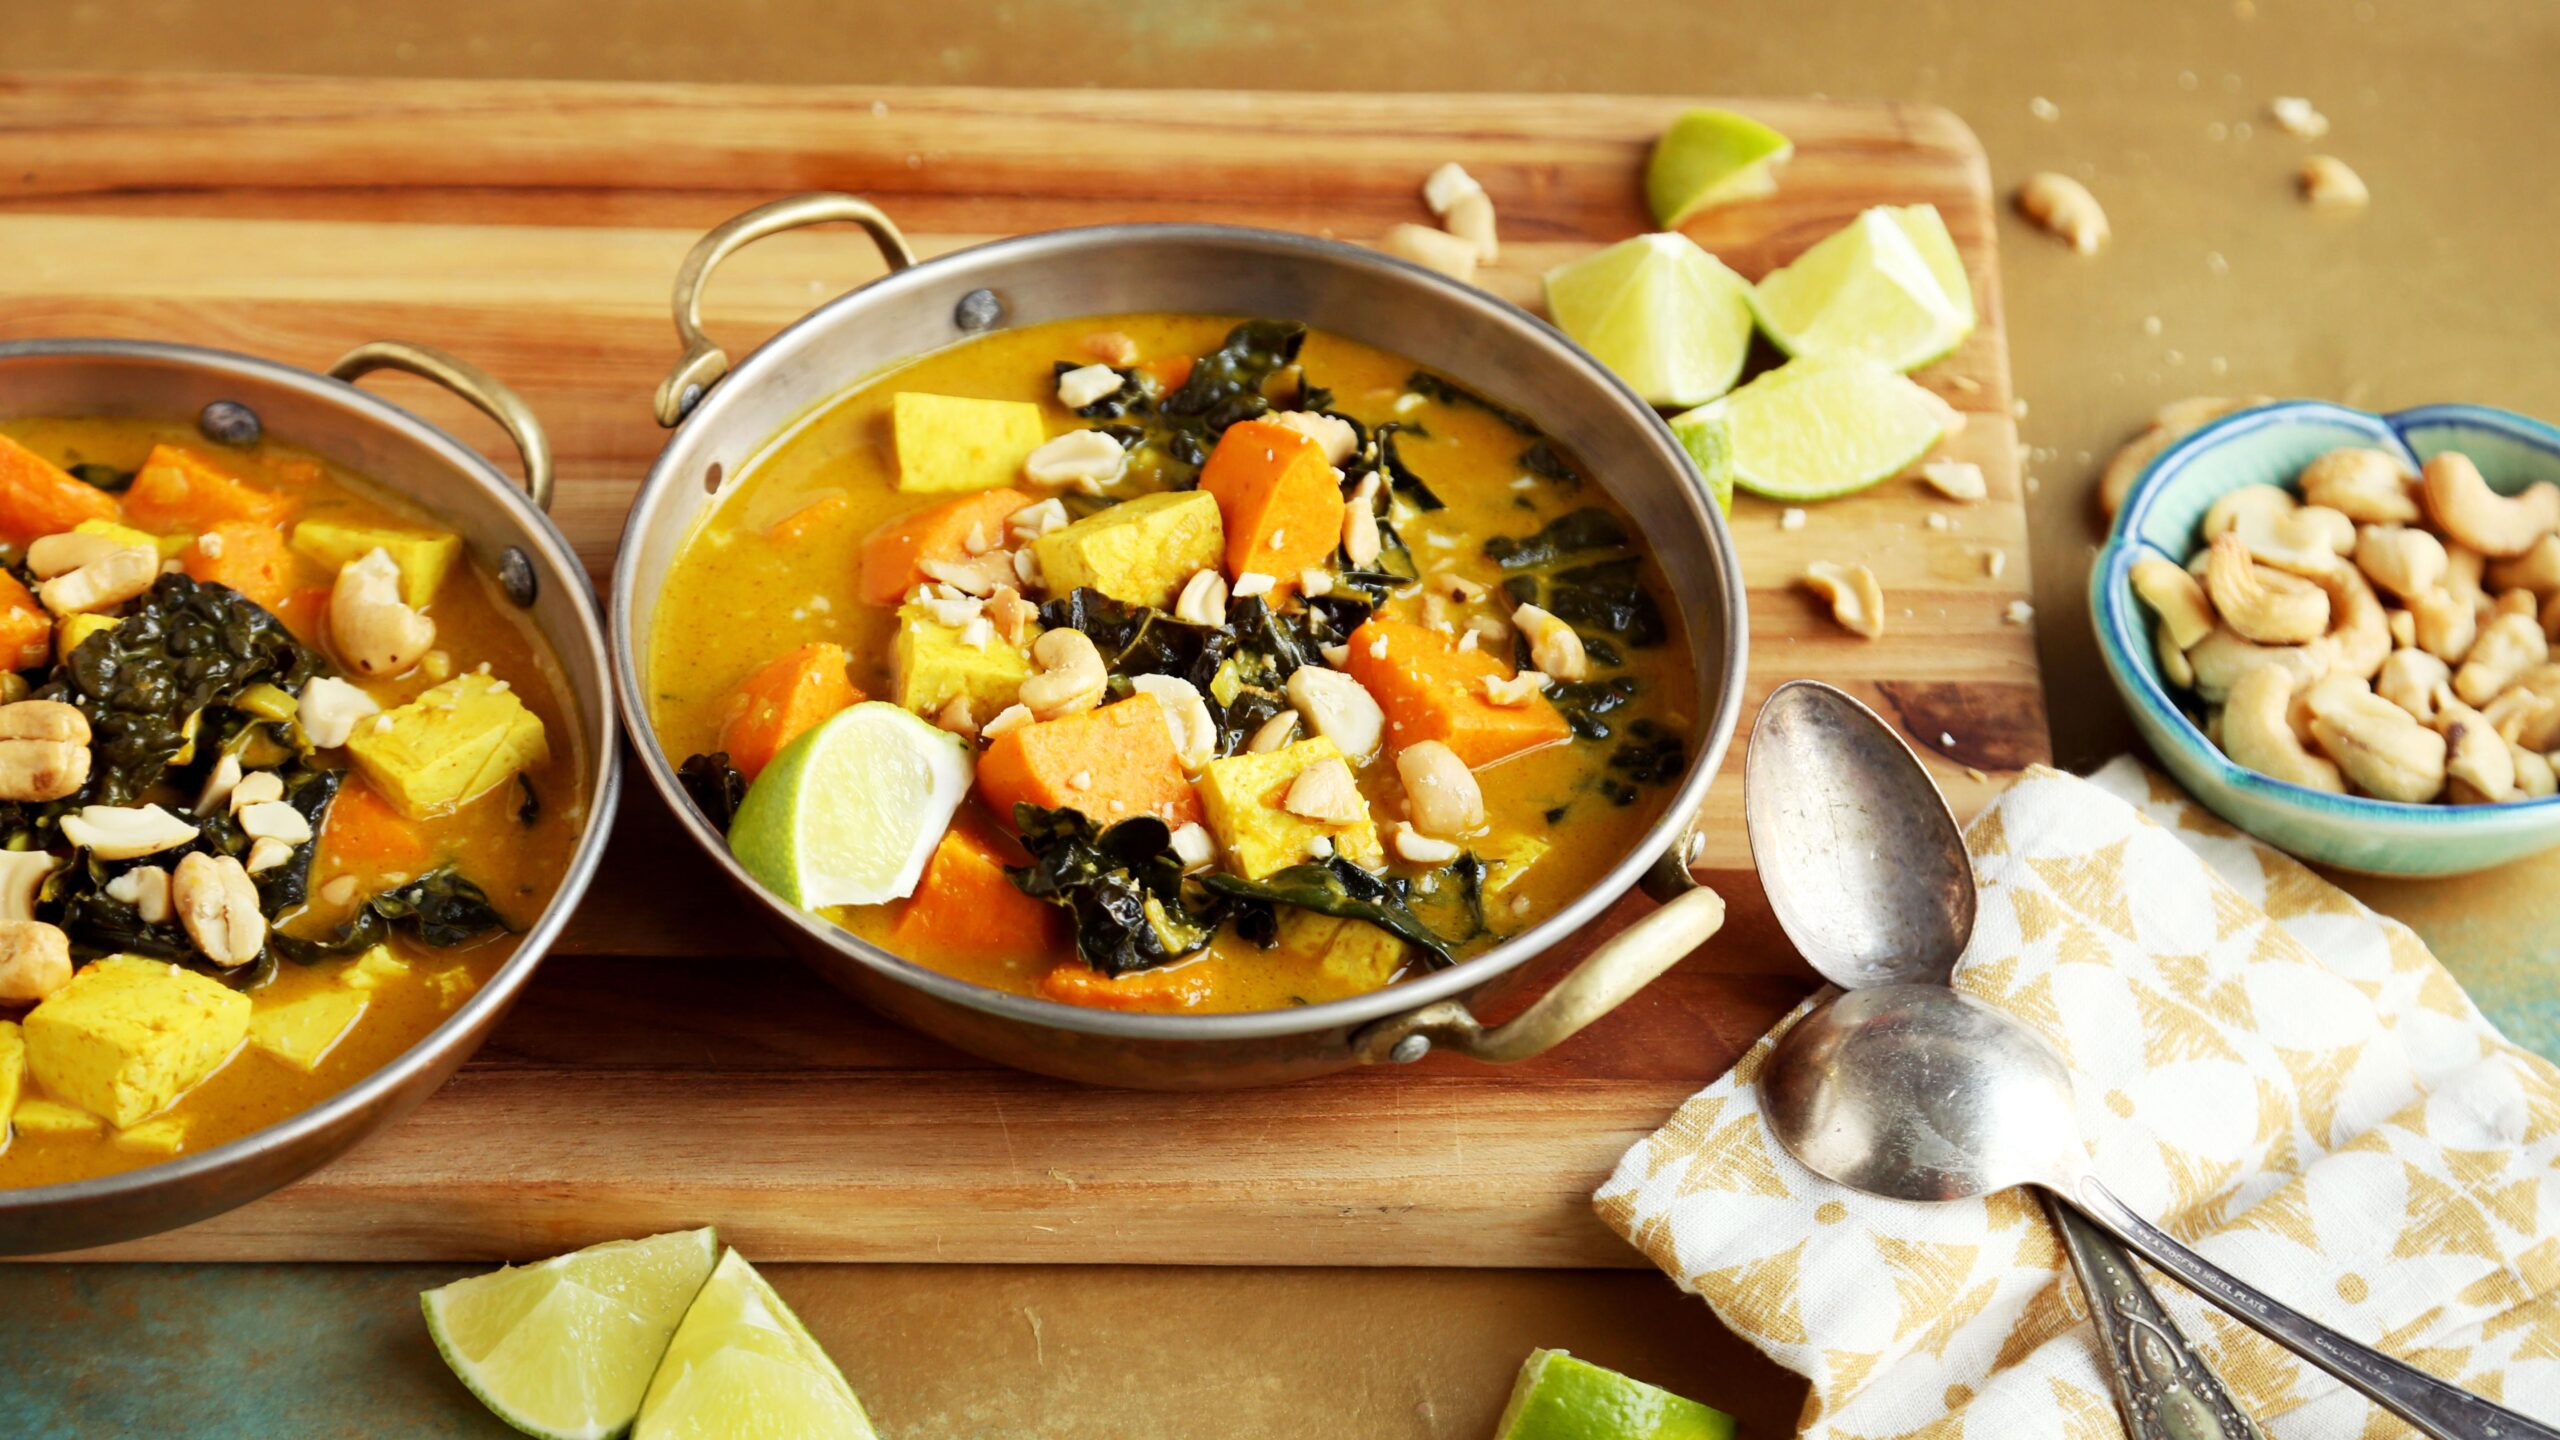  This warm and hearty curry is perfect for a cozy night in.